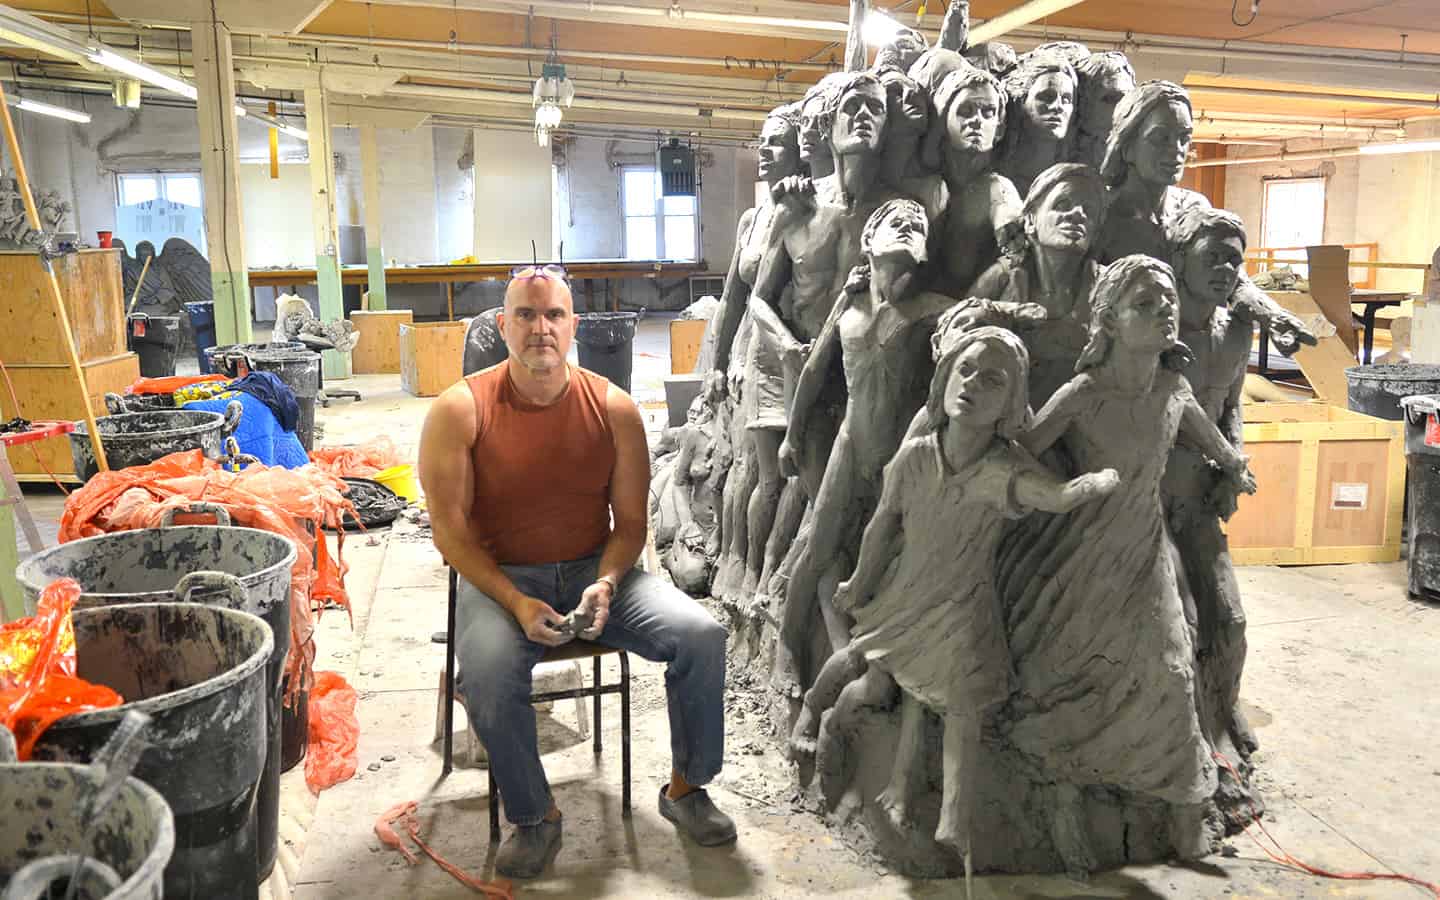 Inspiration turns lumps of clay into coveted works